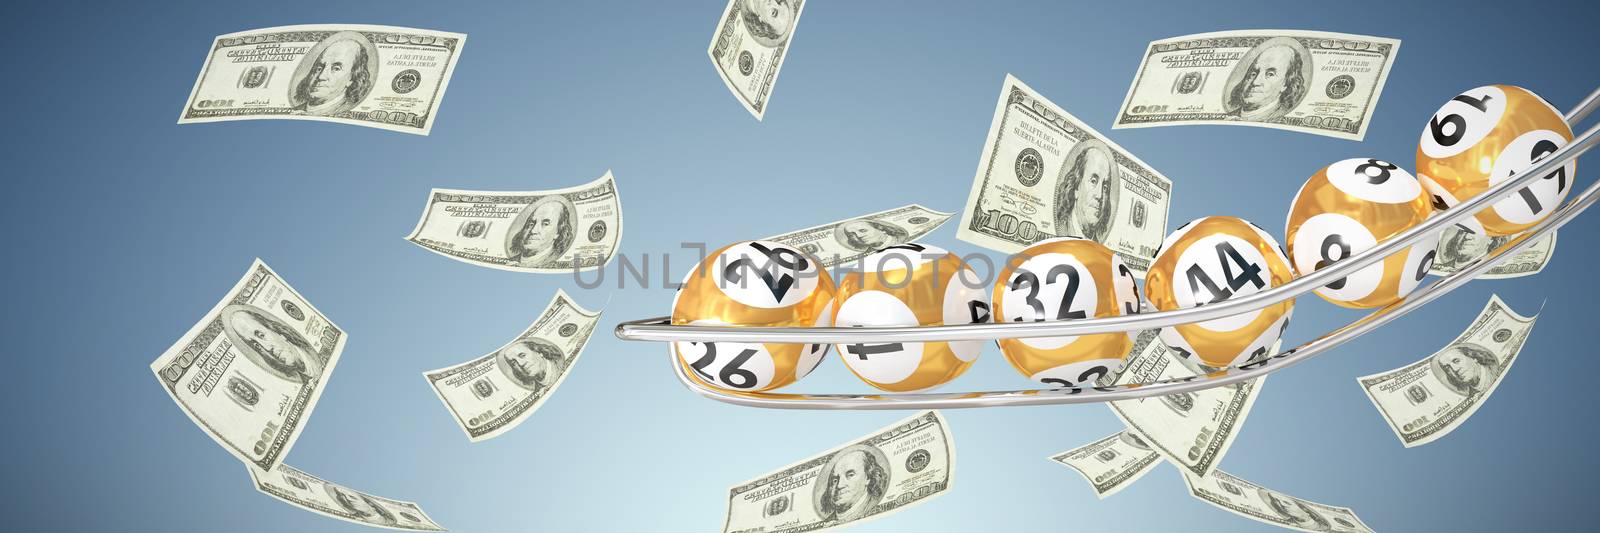 Composite image of balls of the lottery  by Wavebreakmedia